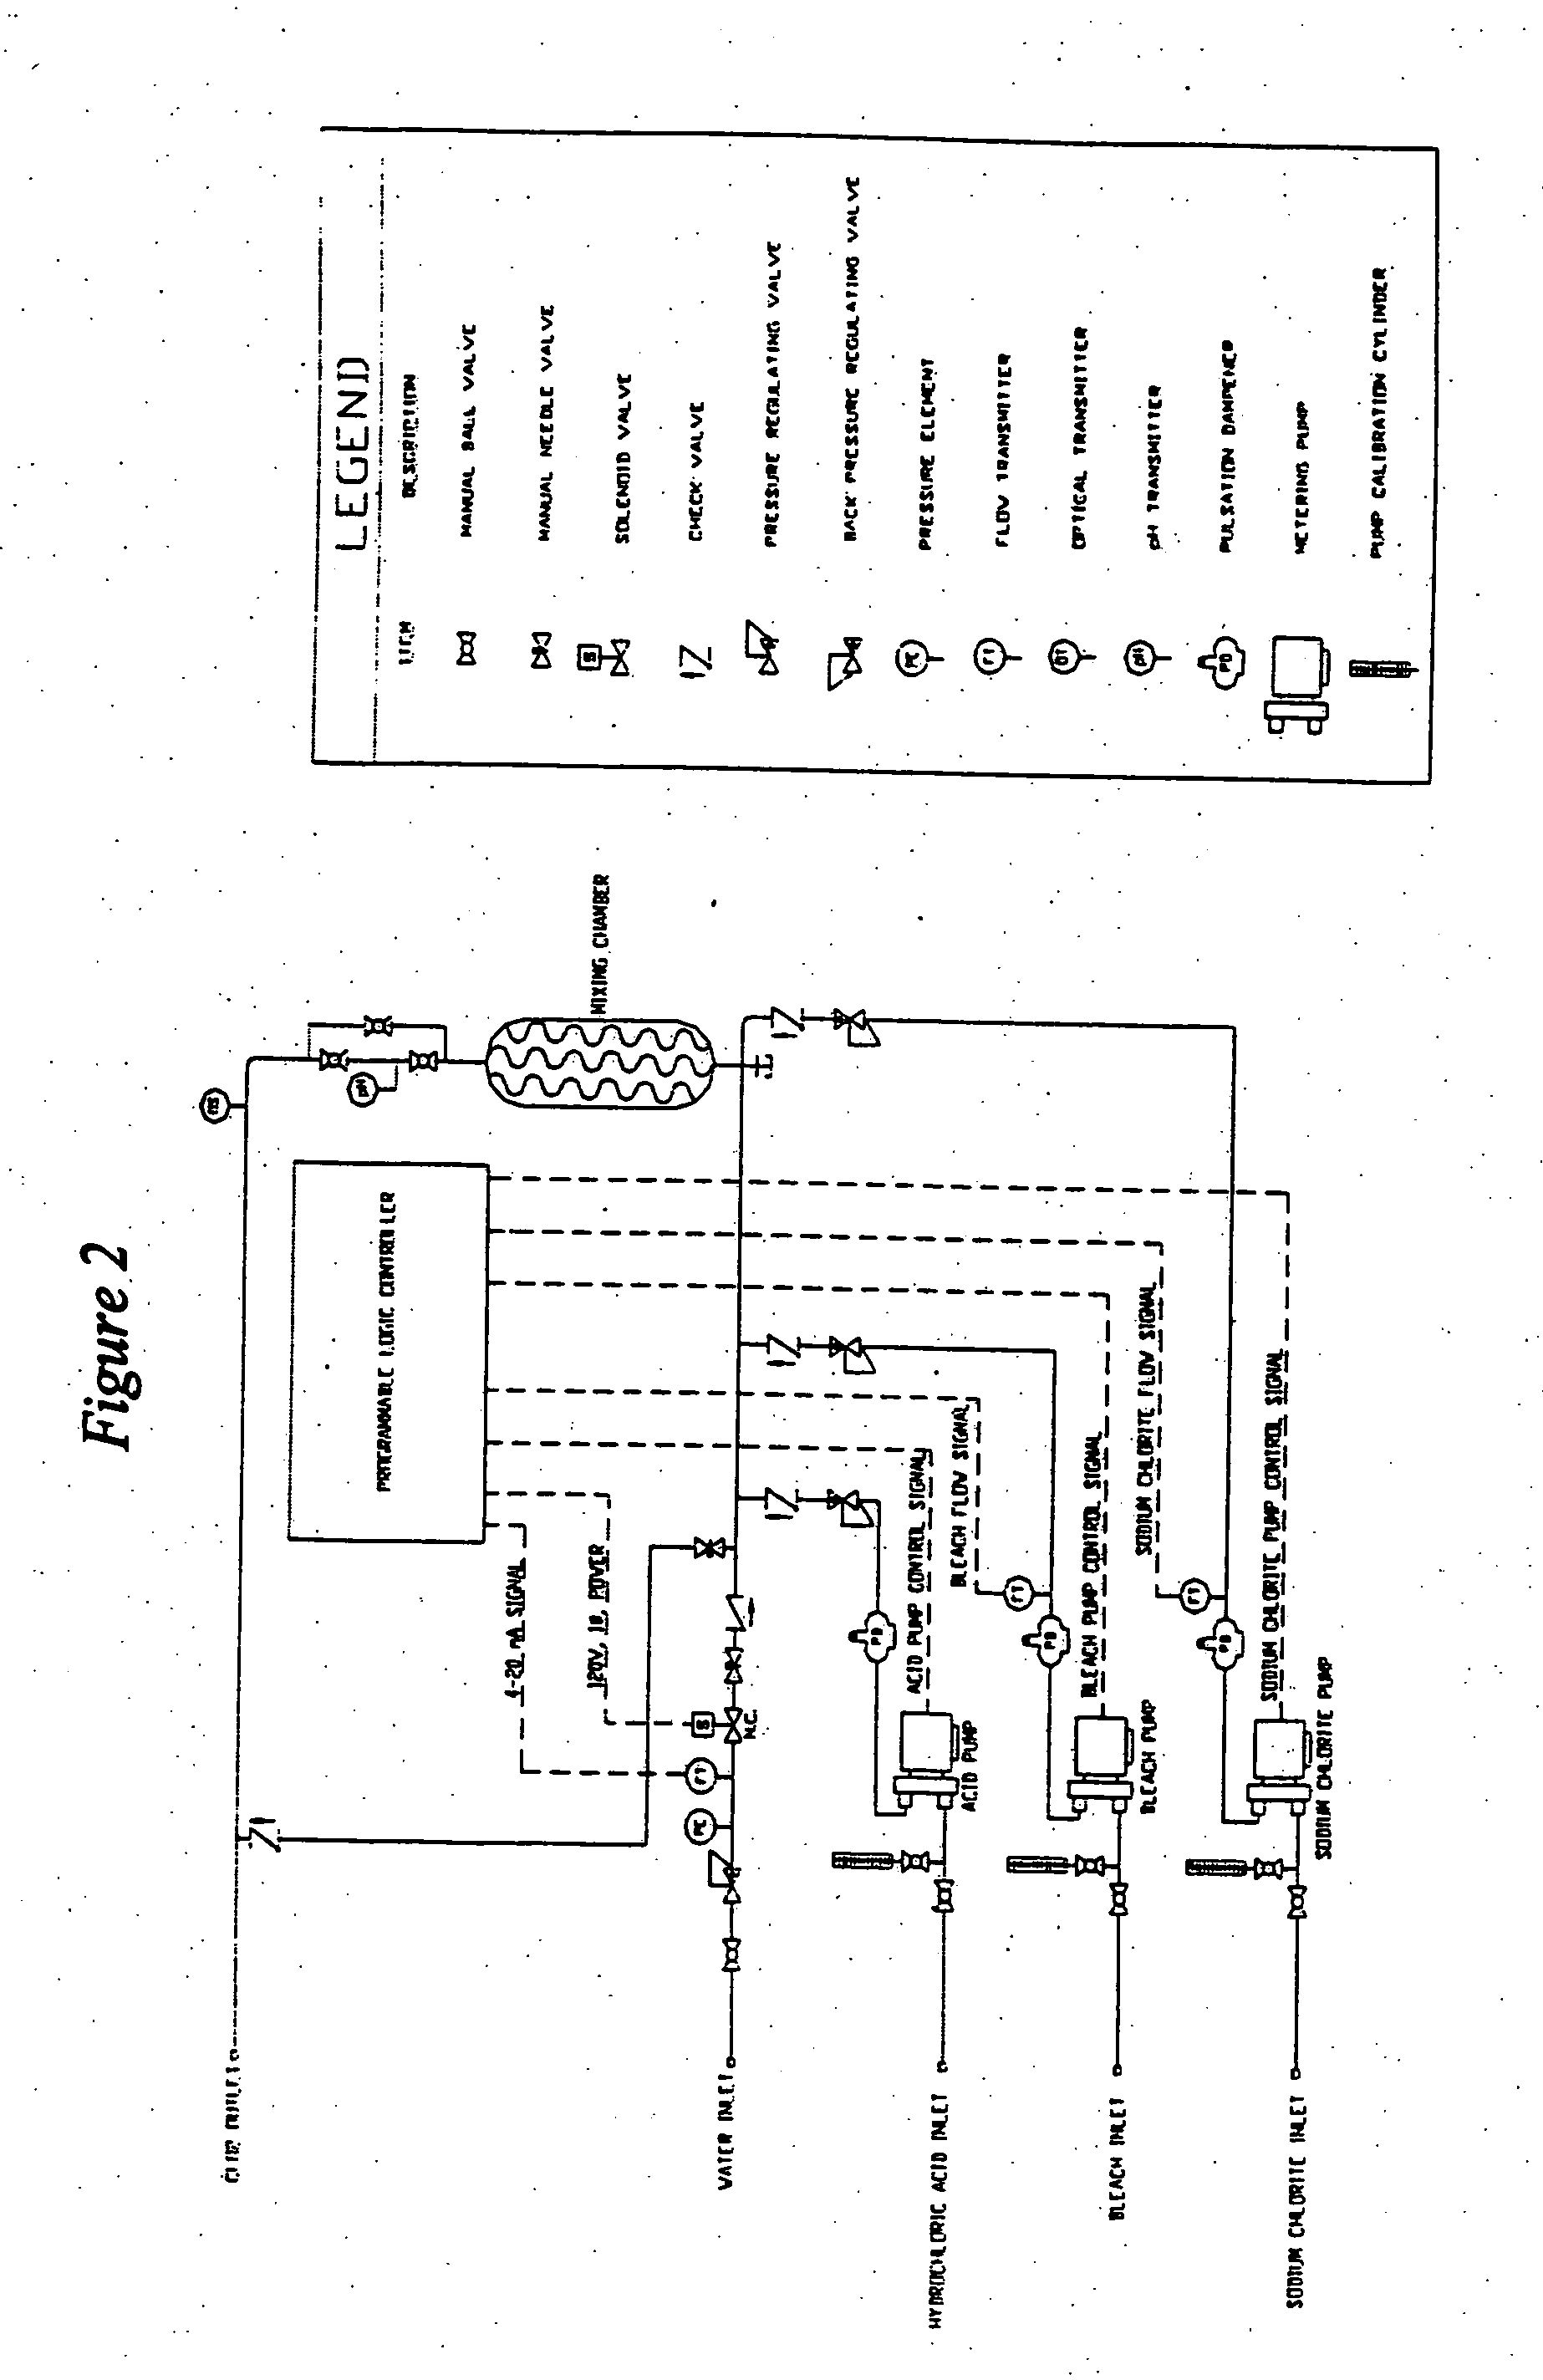 Process for treating an aqueous system with chlorine dioxide